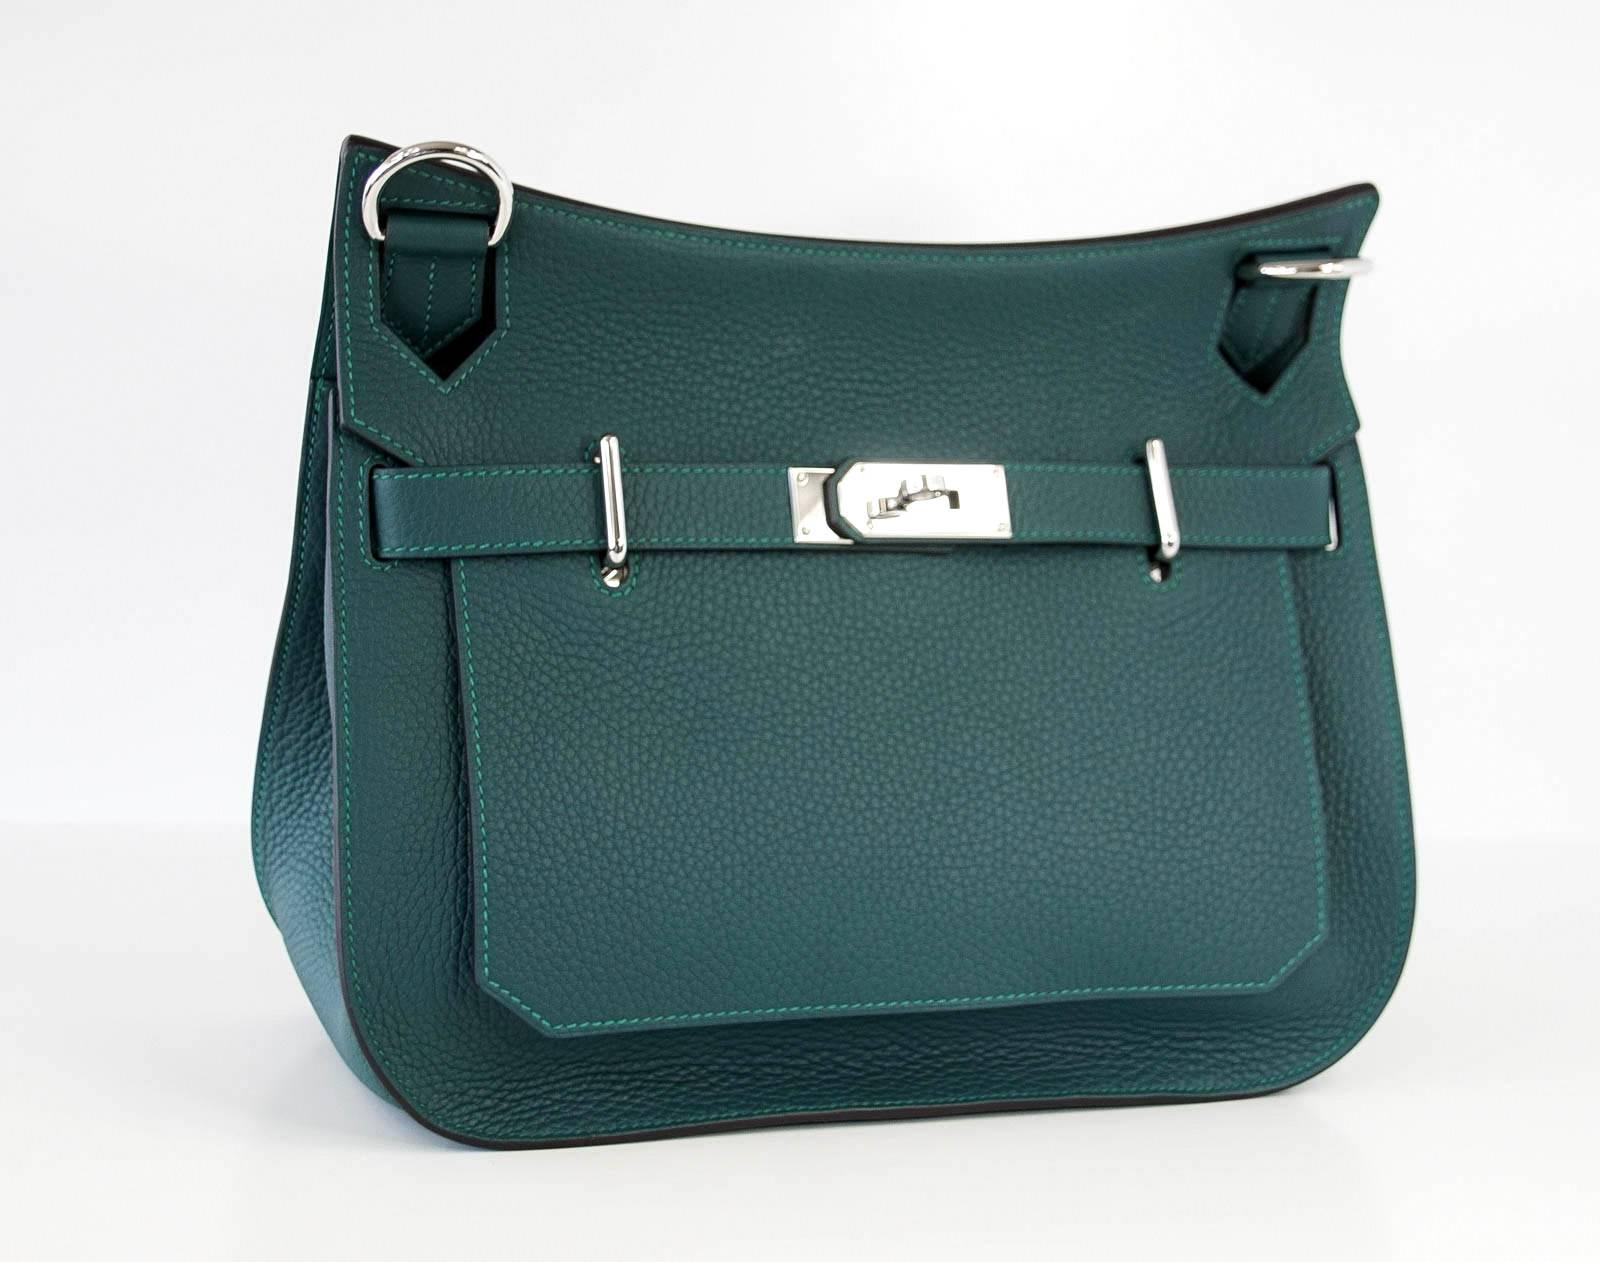 Guaranteed authentic Malachite Jypsiere in clemence leather with palladium hardware. 
Versatile shoulder or cross body bag with roomy interior.
Inside the bag has 2 slot pockets and 1 zip pocket.
Comes with sleeper, strap and signature HERMES